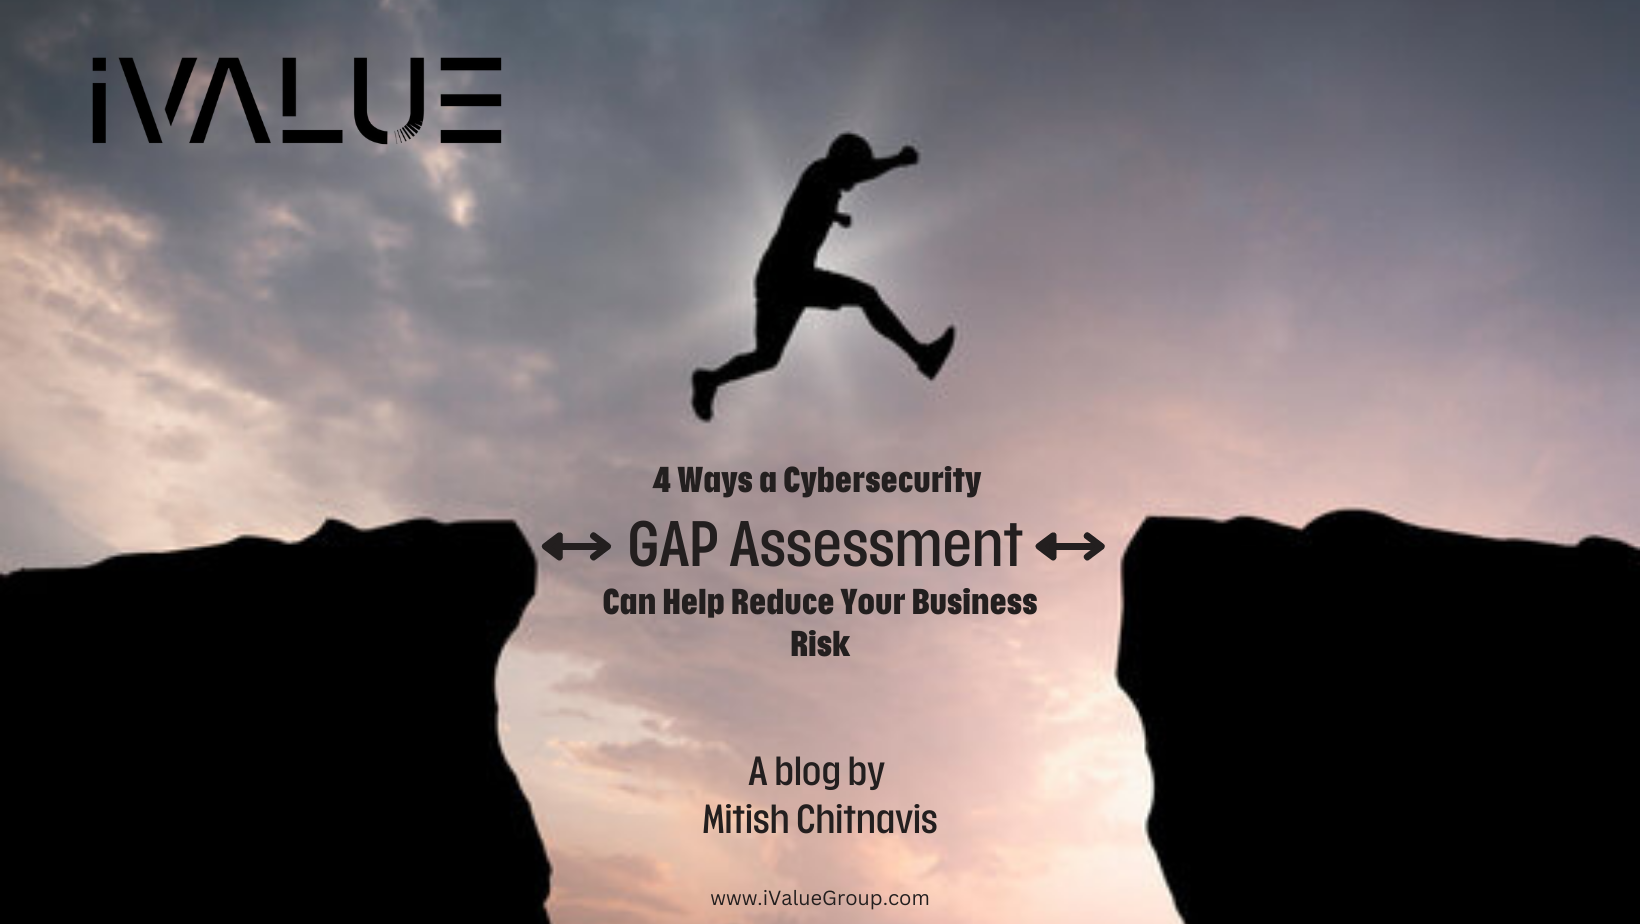 4 Ways a Cybersecurity Gap Assessment Can Help Reduce Your Business Risk